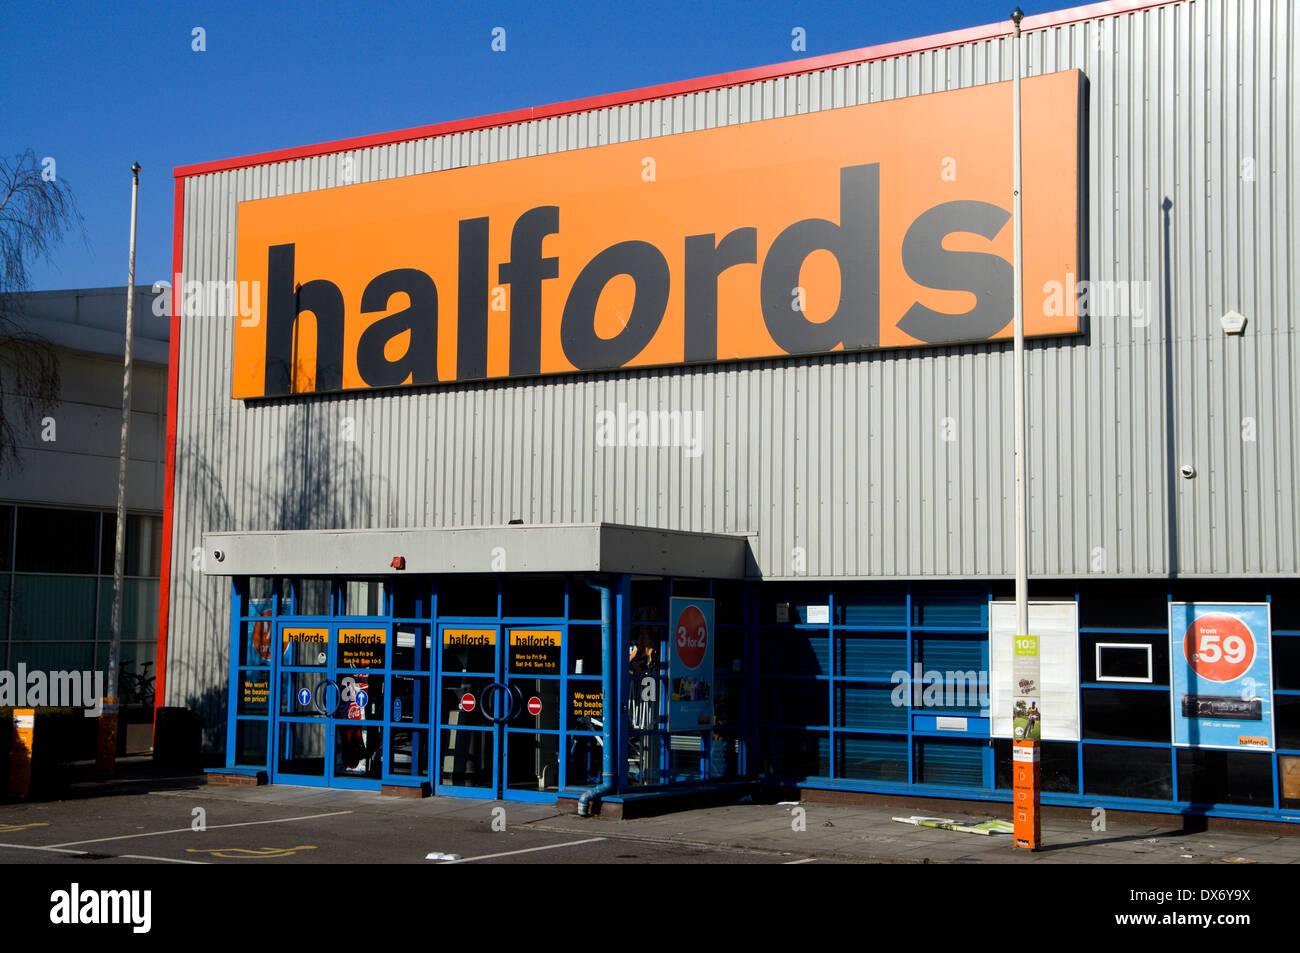 Halfords superstore penarth road cardiff wales uk Stock Photo